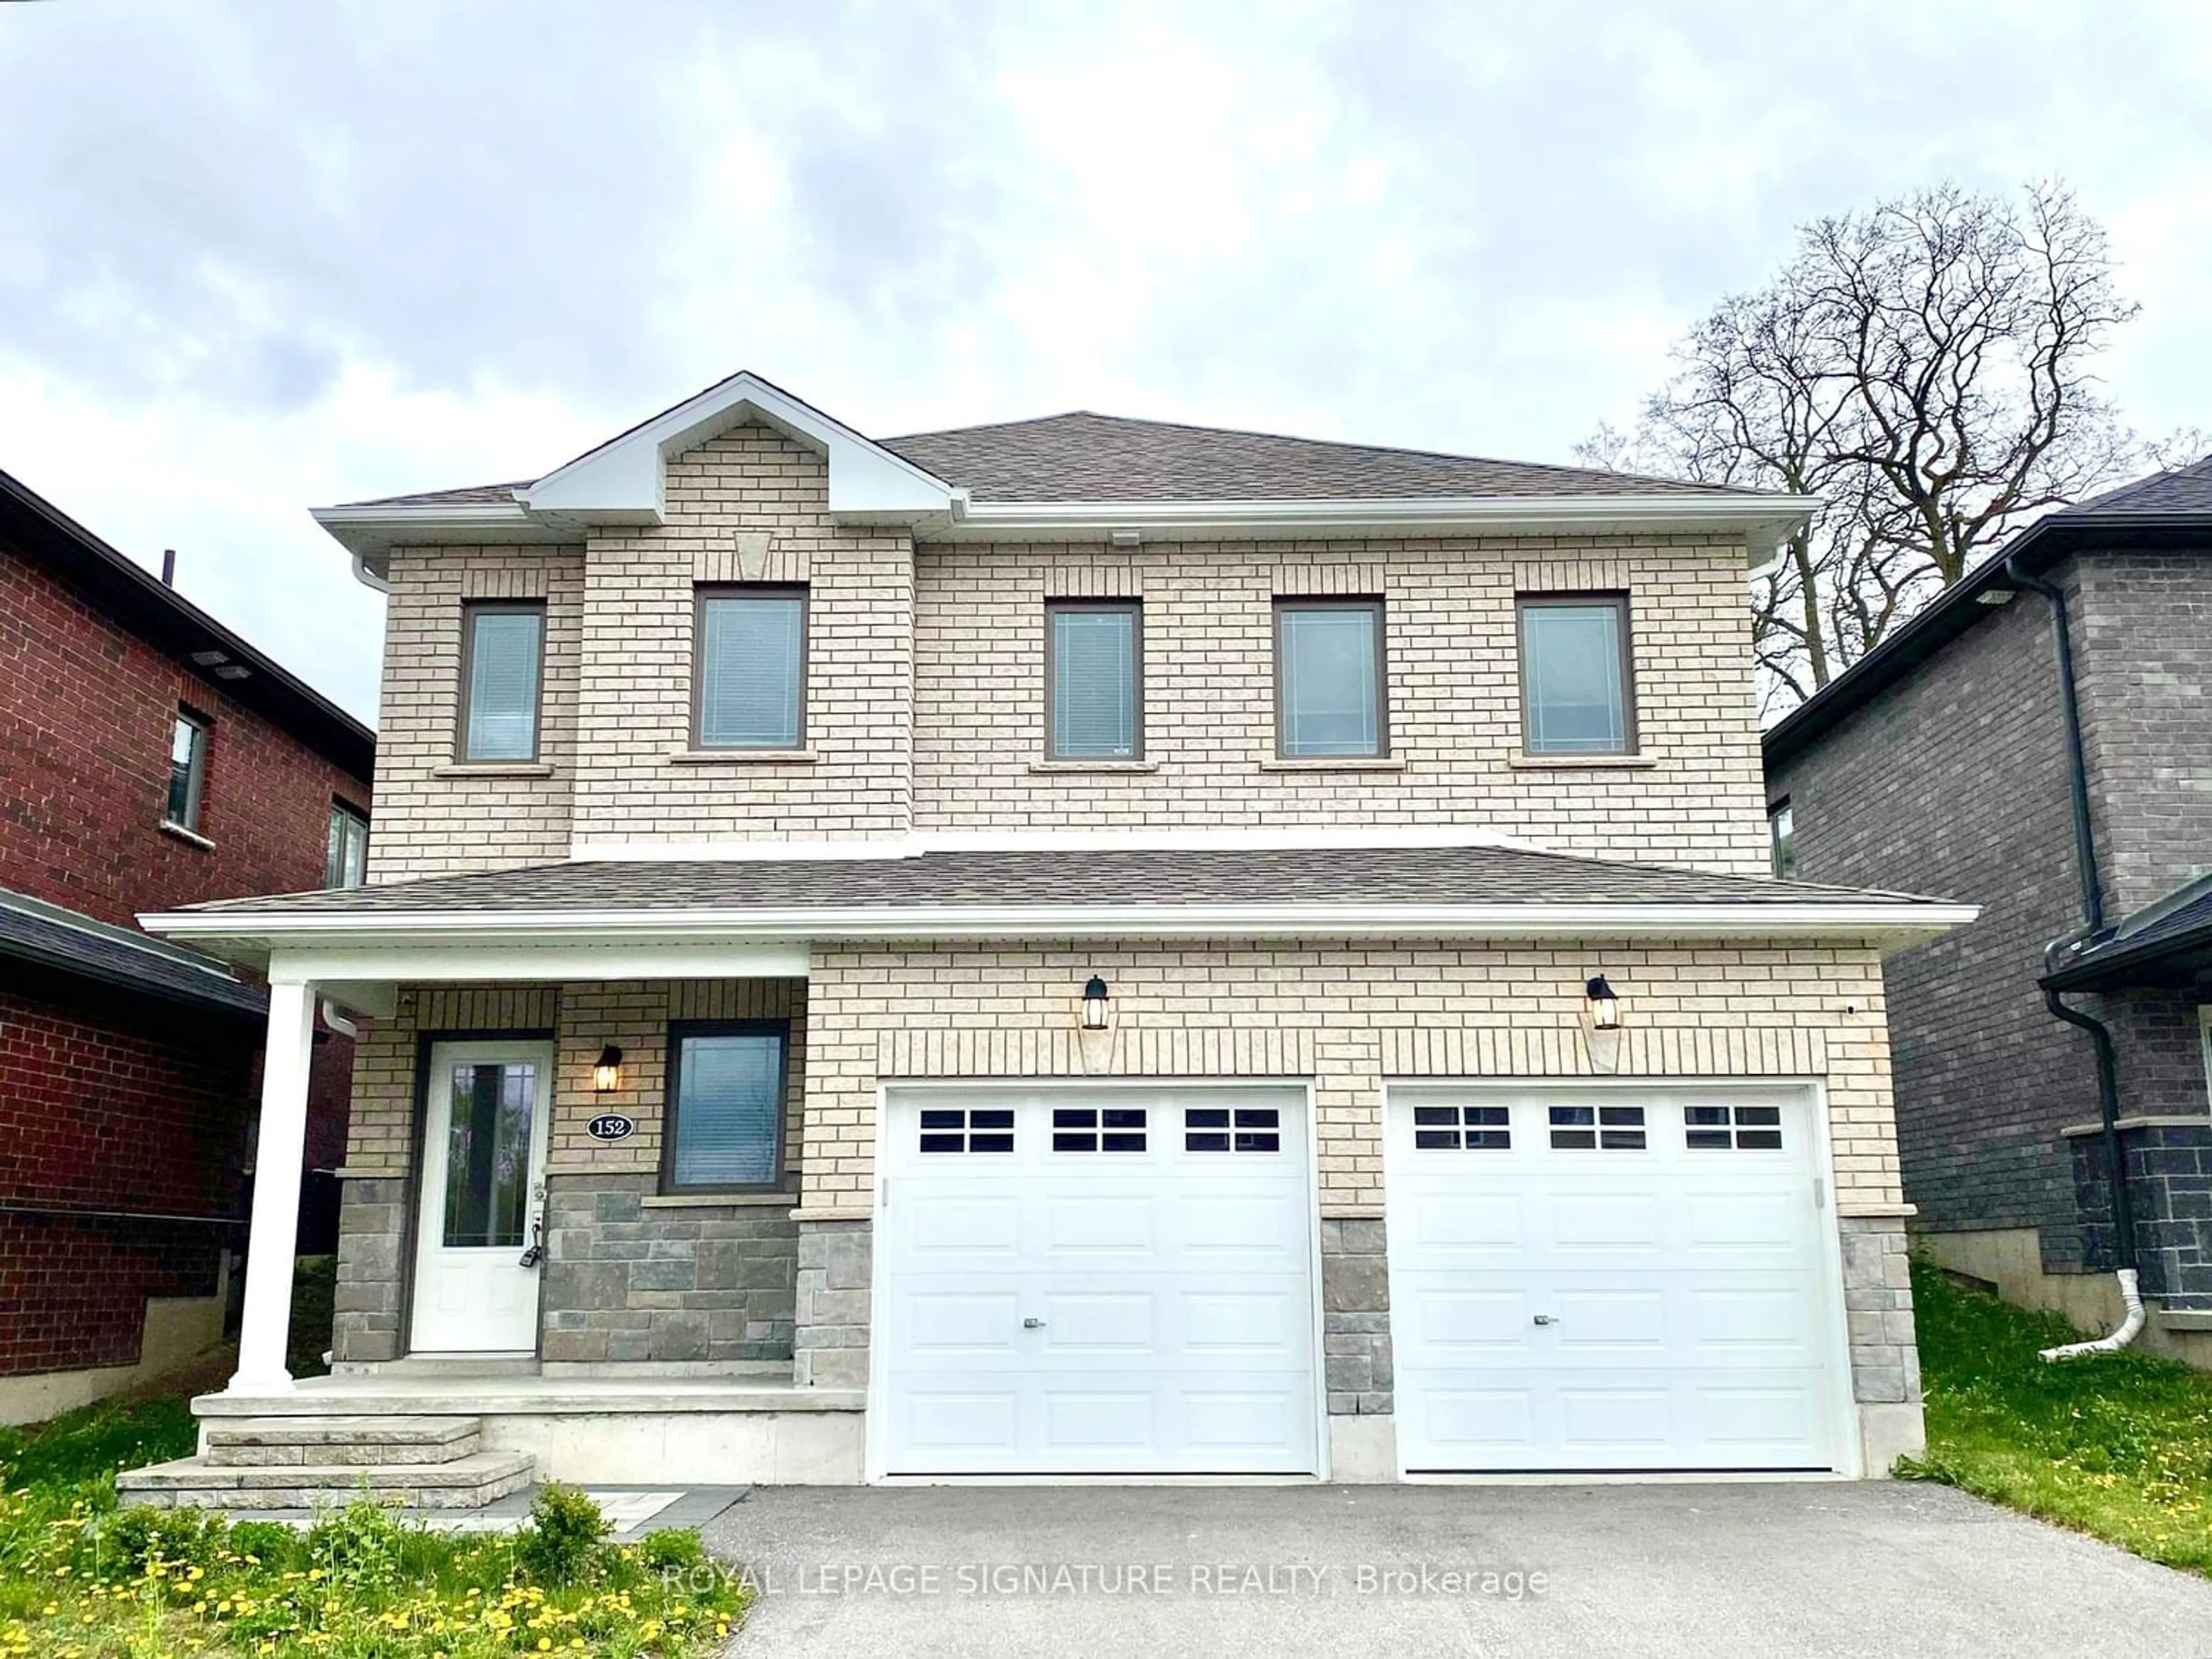 Home with brick exterior material for 152 Bishop Dr, Barrie Ontario L4N 6X8